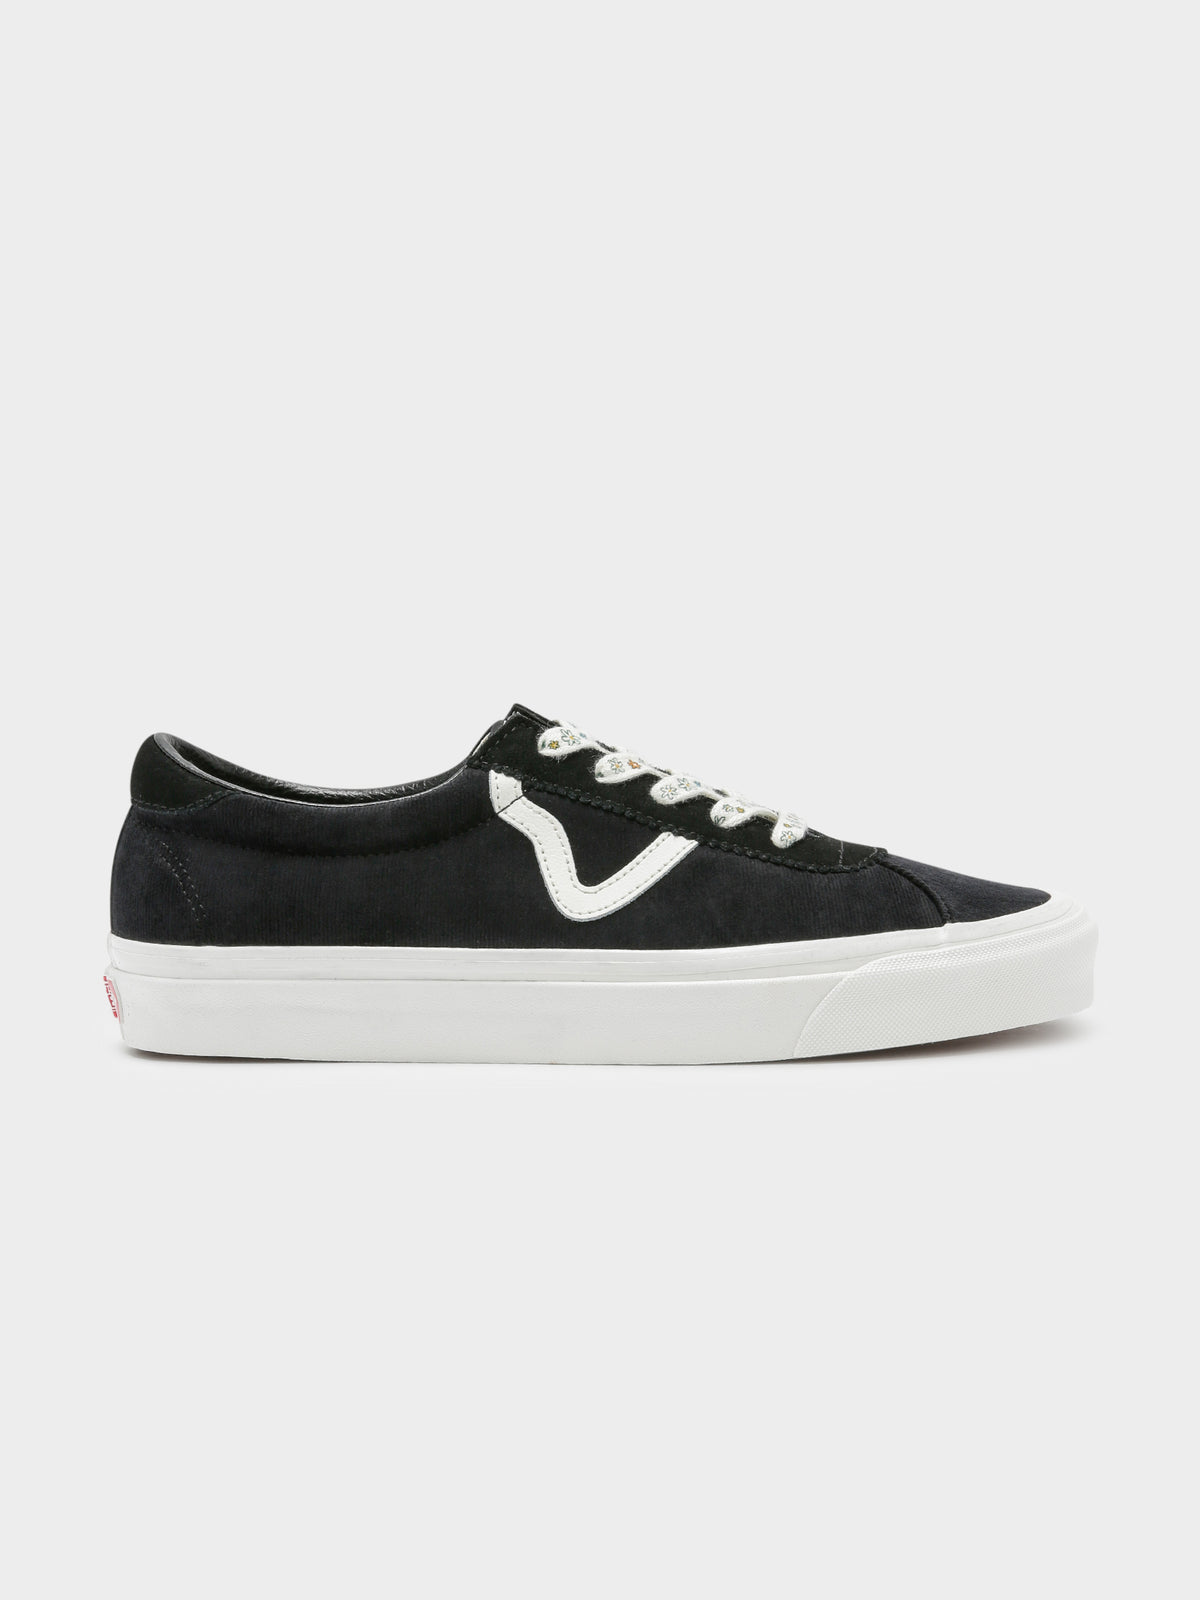 Unisex Style 73 DX Anaheim Sneakers in Black